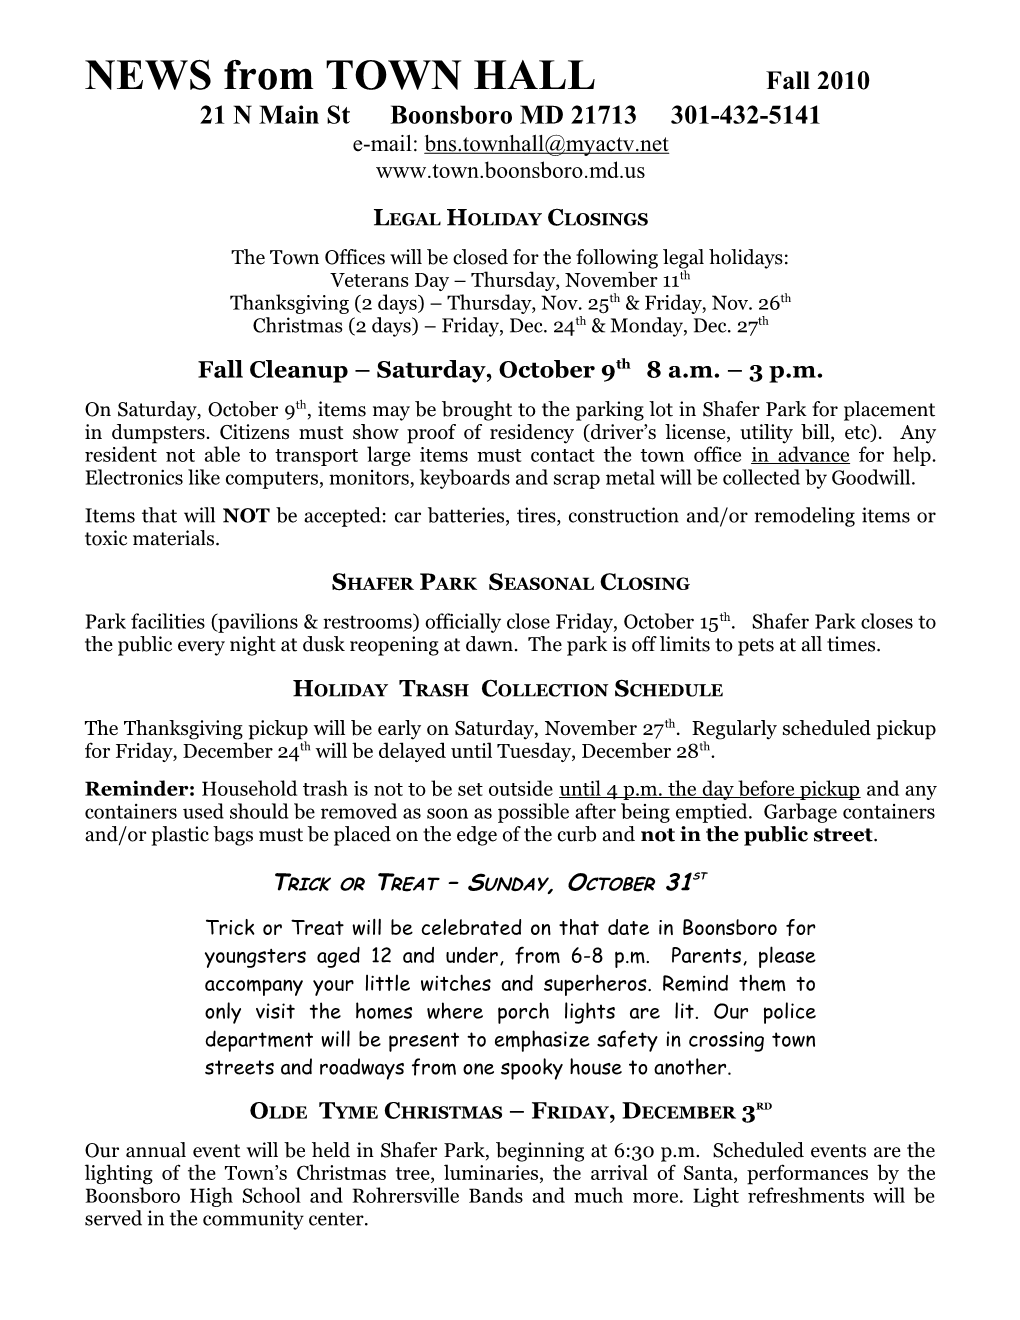 NEWS from TOWN HALL Fall 2008